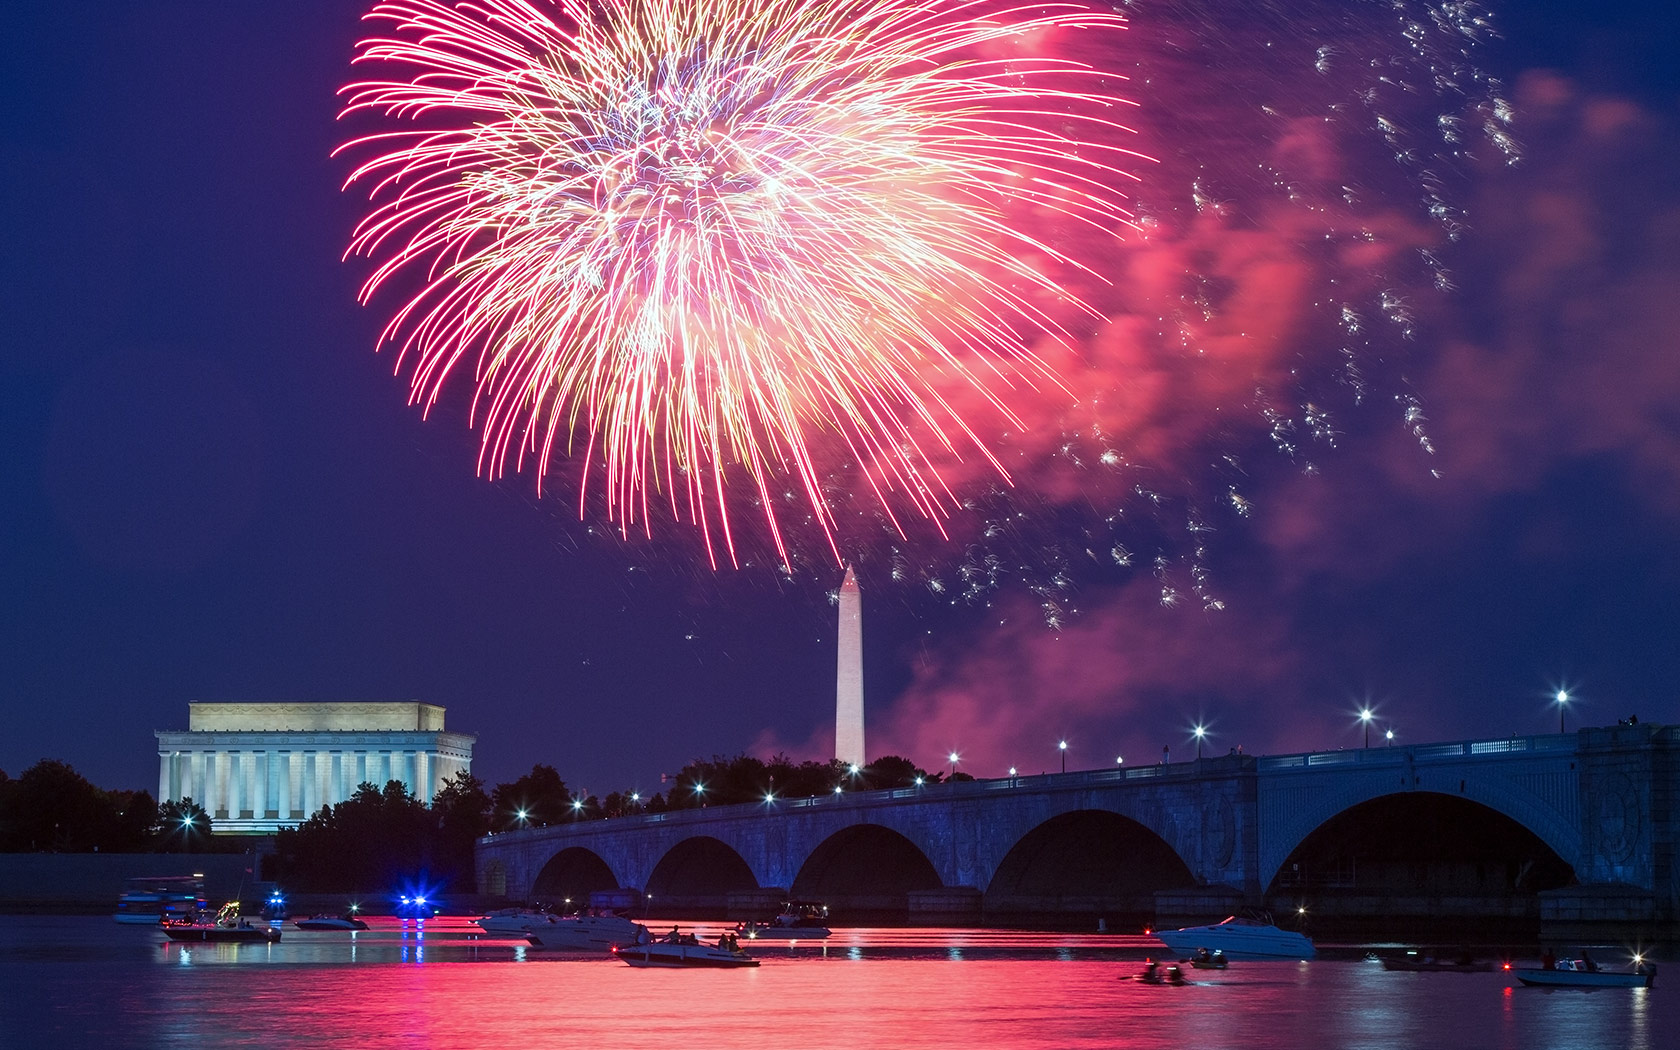 July 4th Fireworks over the Potomac River with the Lincoln Memorial, Washington Monument and Arlington Bridge in the background